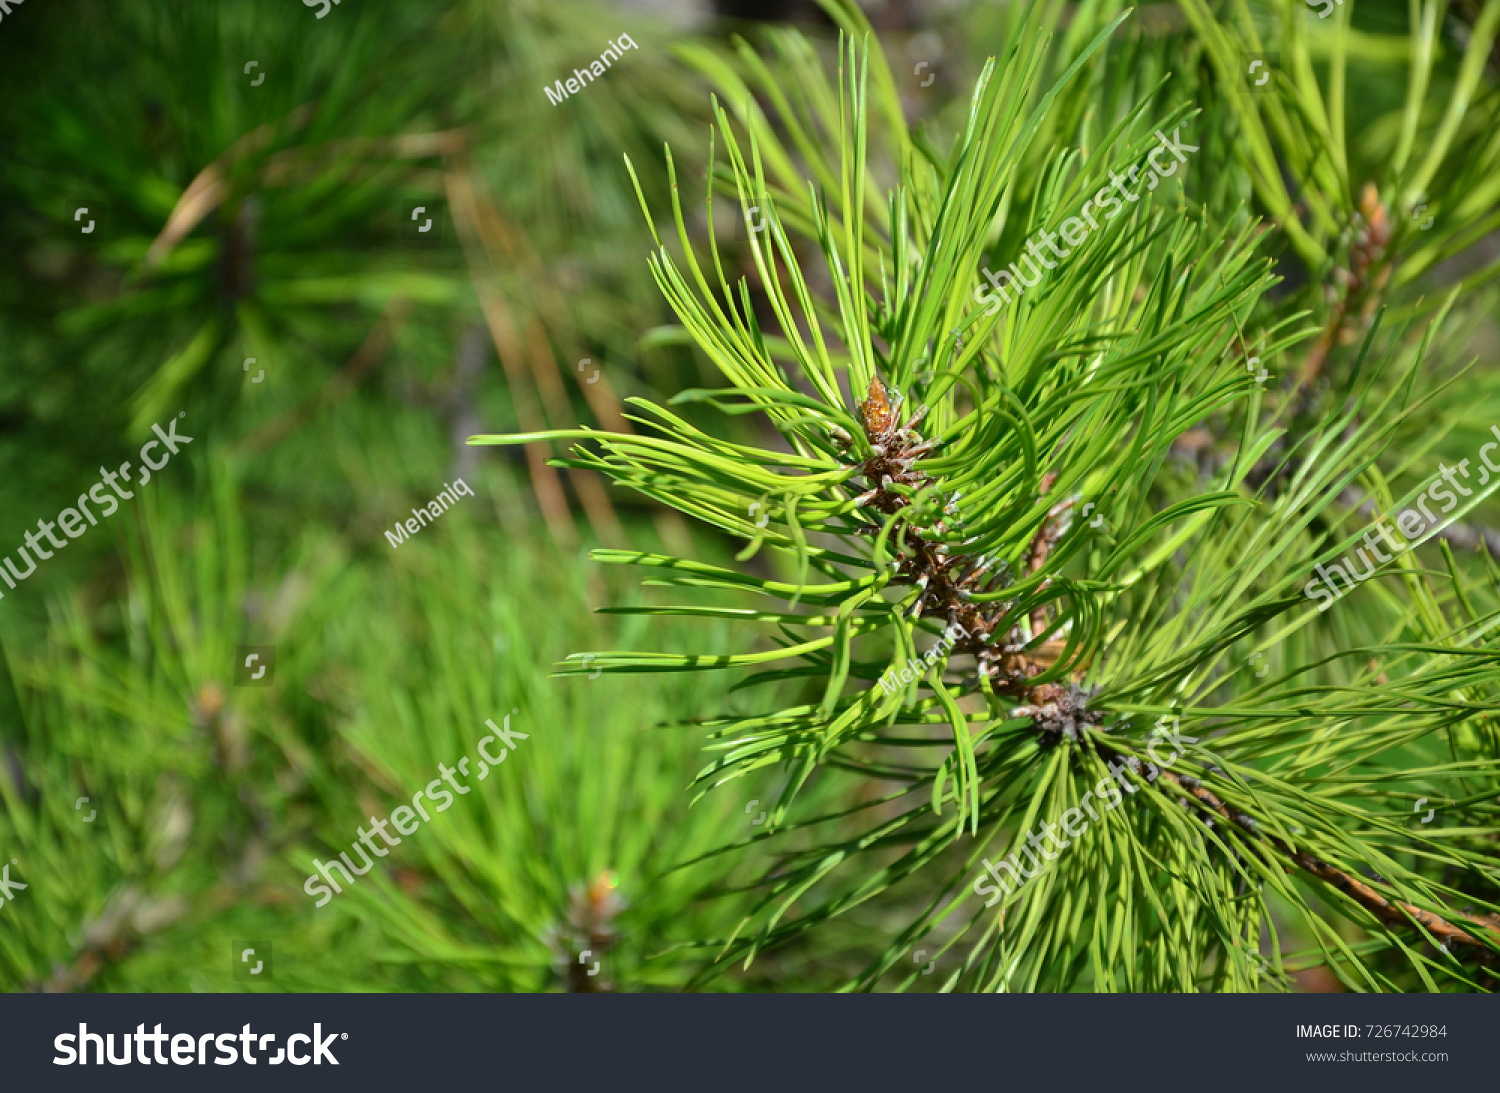 Green spruce branch in Sunny weather in the daytime outdoors. Floral background image with blurred background #726742984